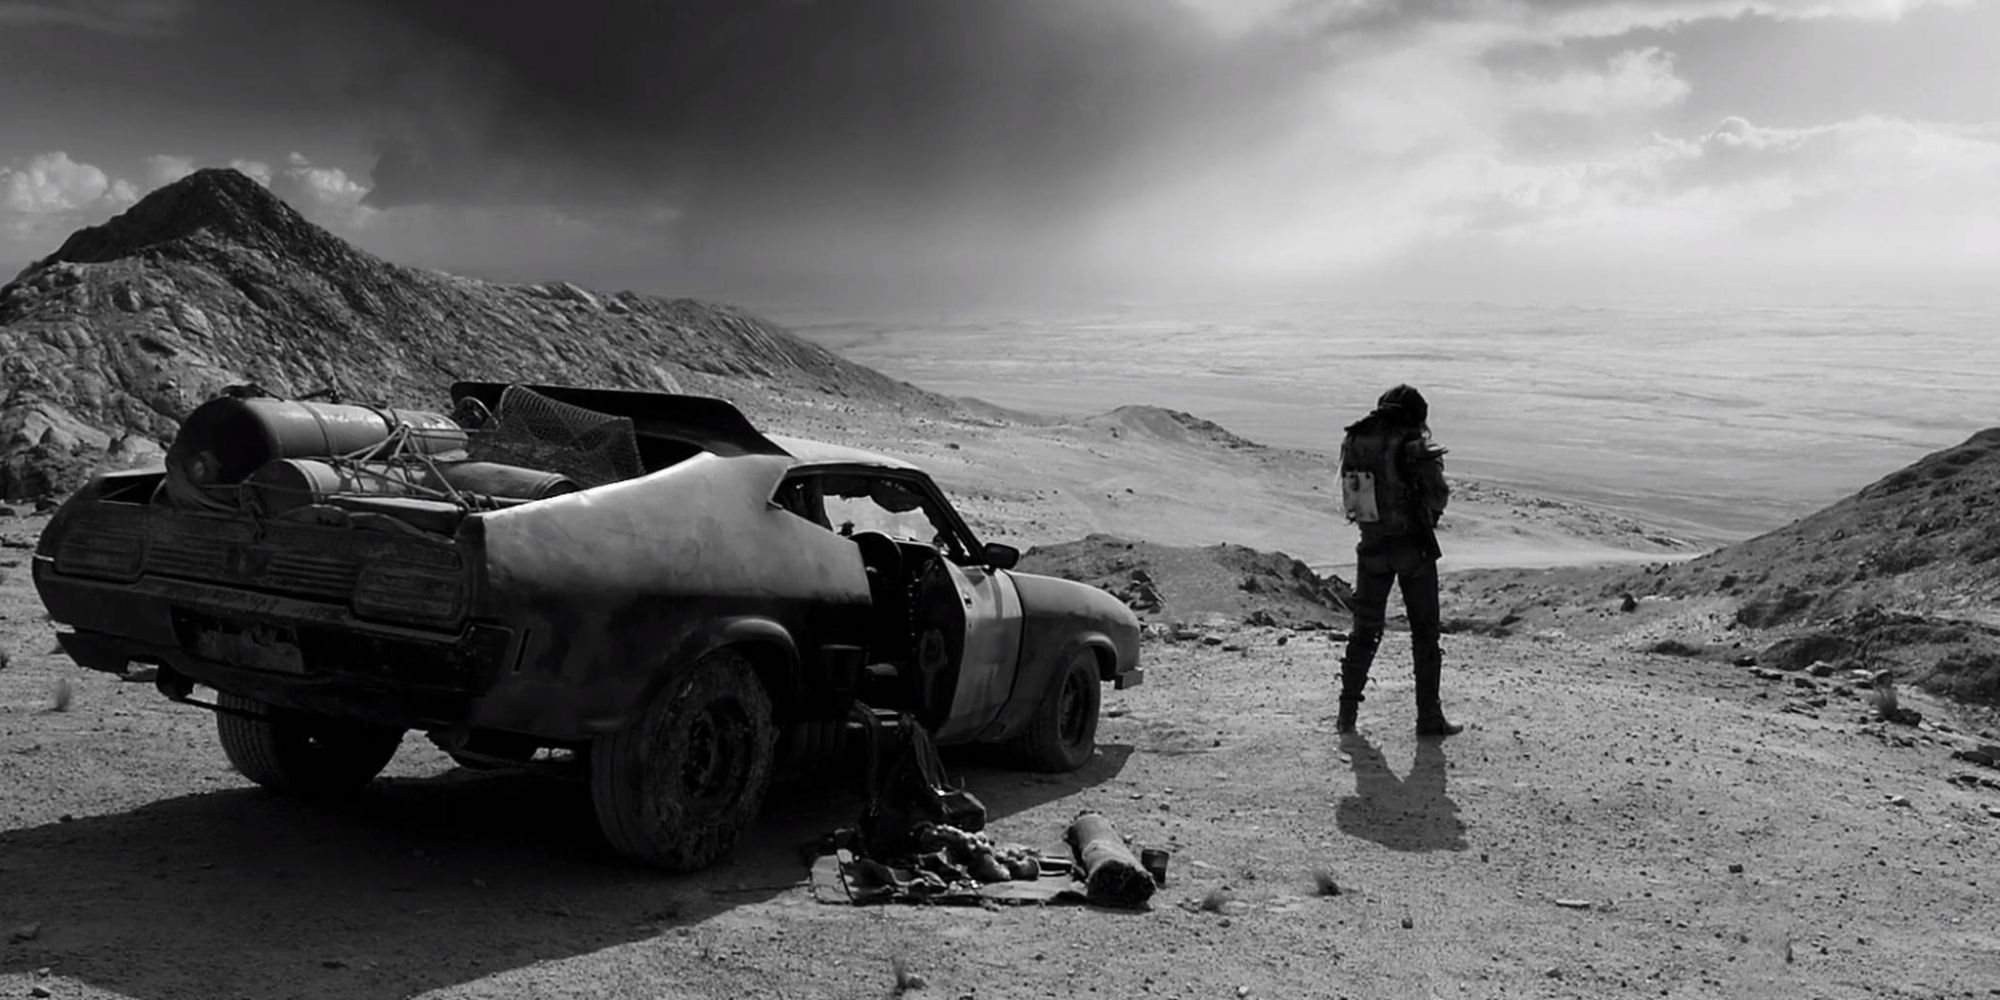 mad max fury road black and chrome edition